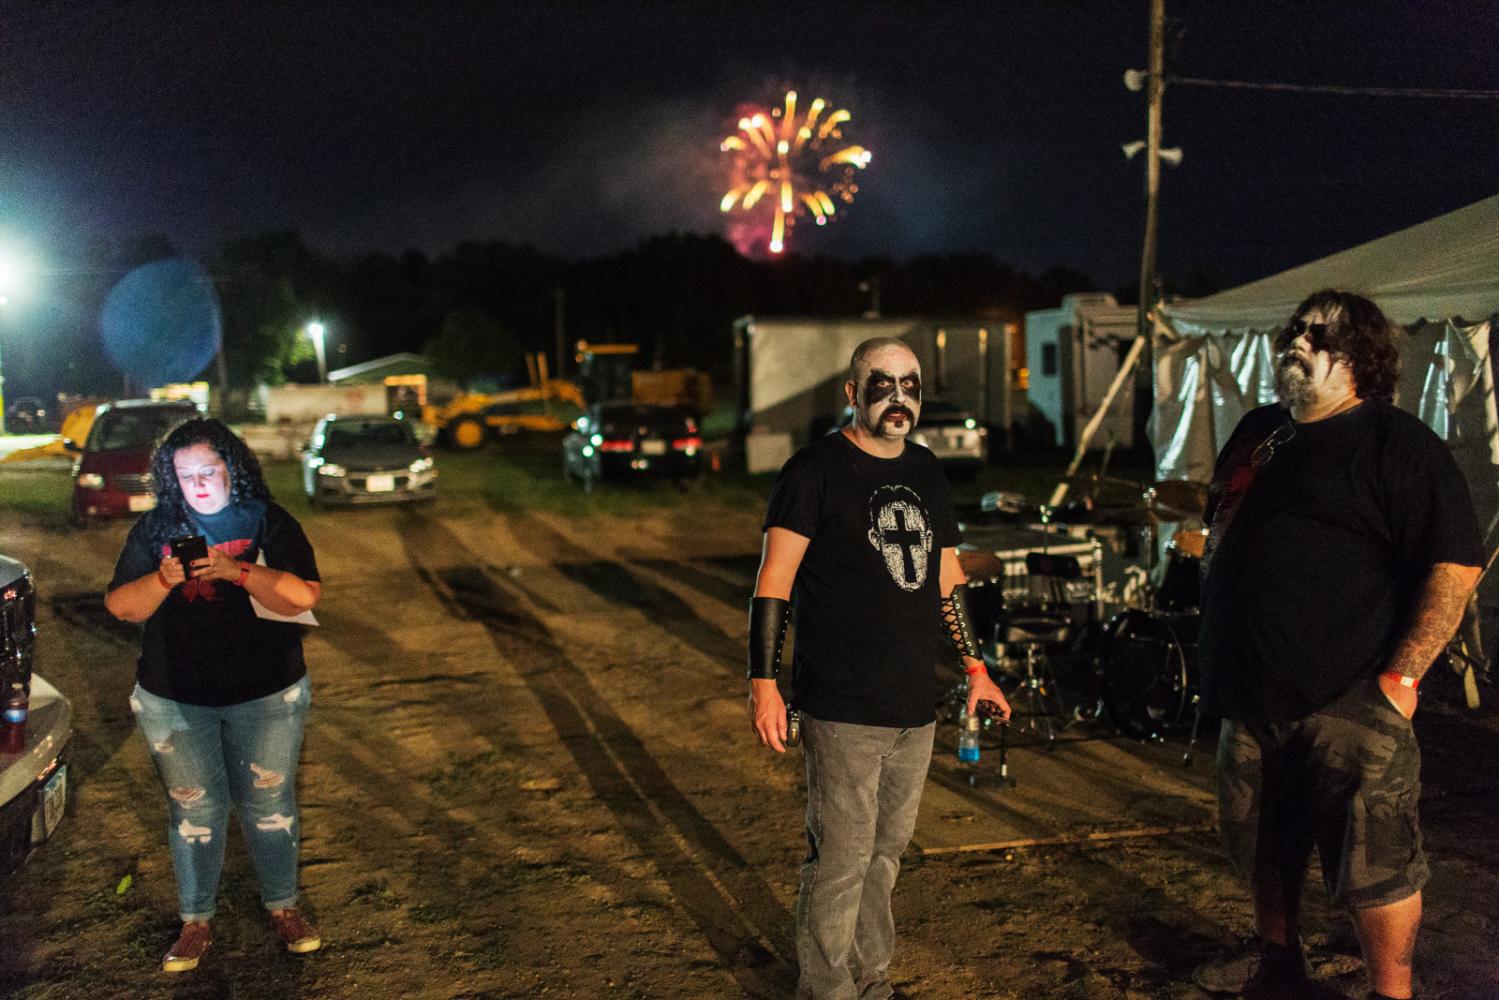 A band gets ready to perform while fireworks go off in the background at Audiofeed Festival in...